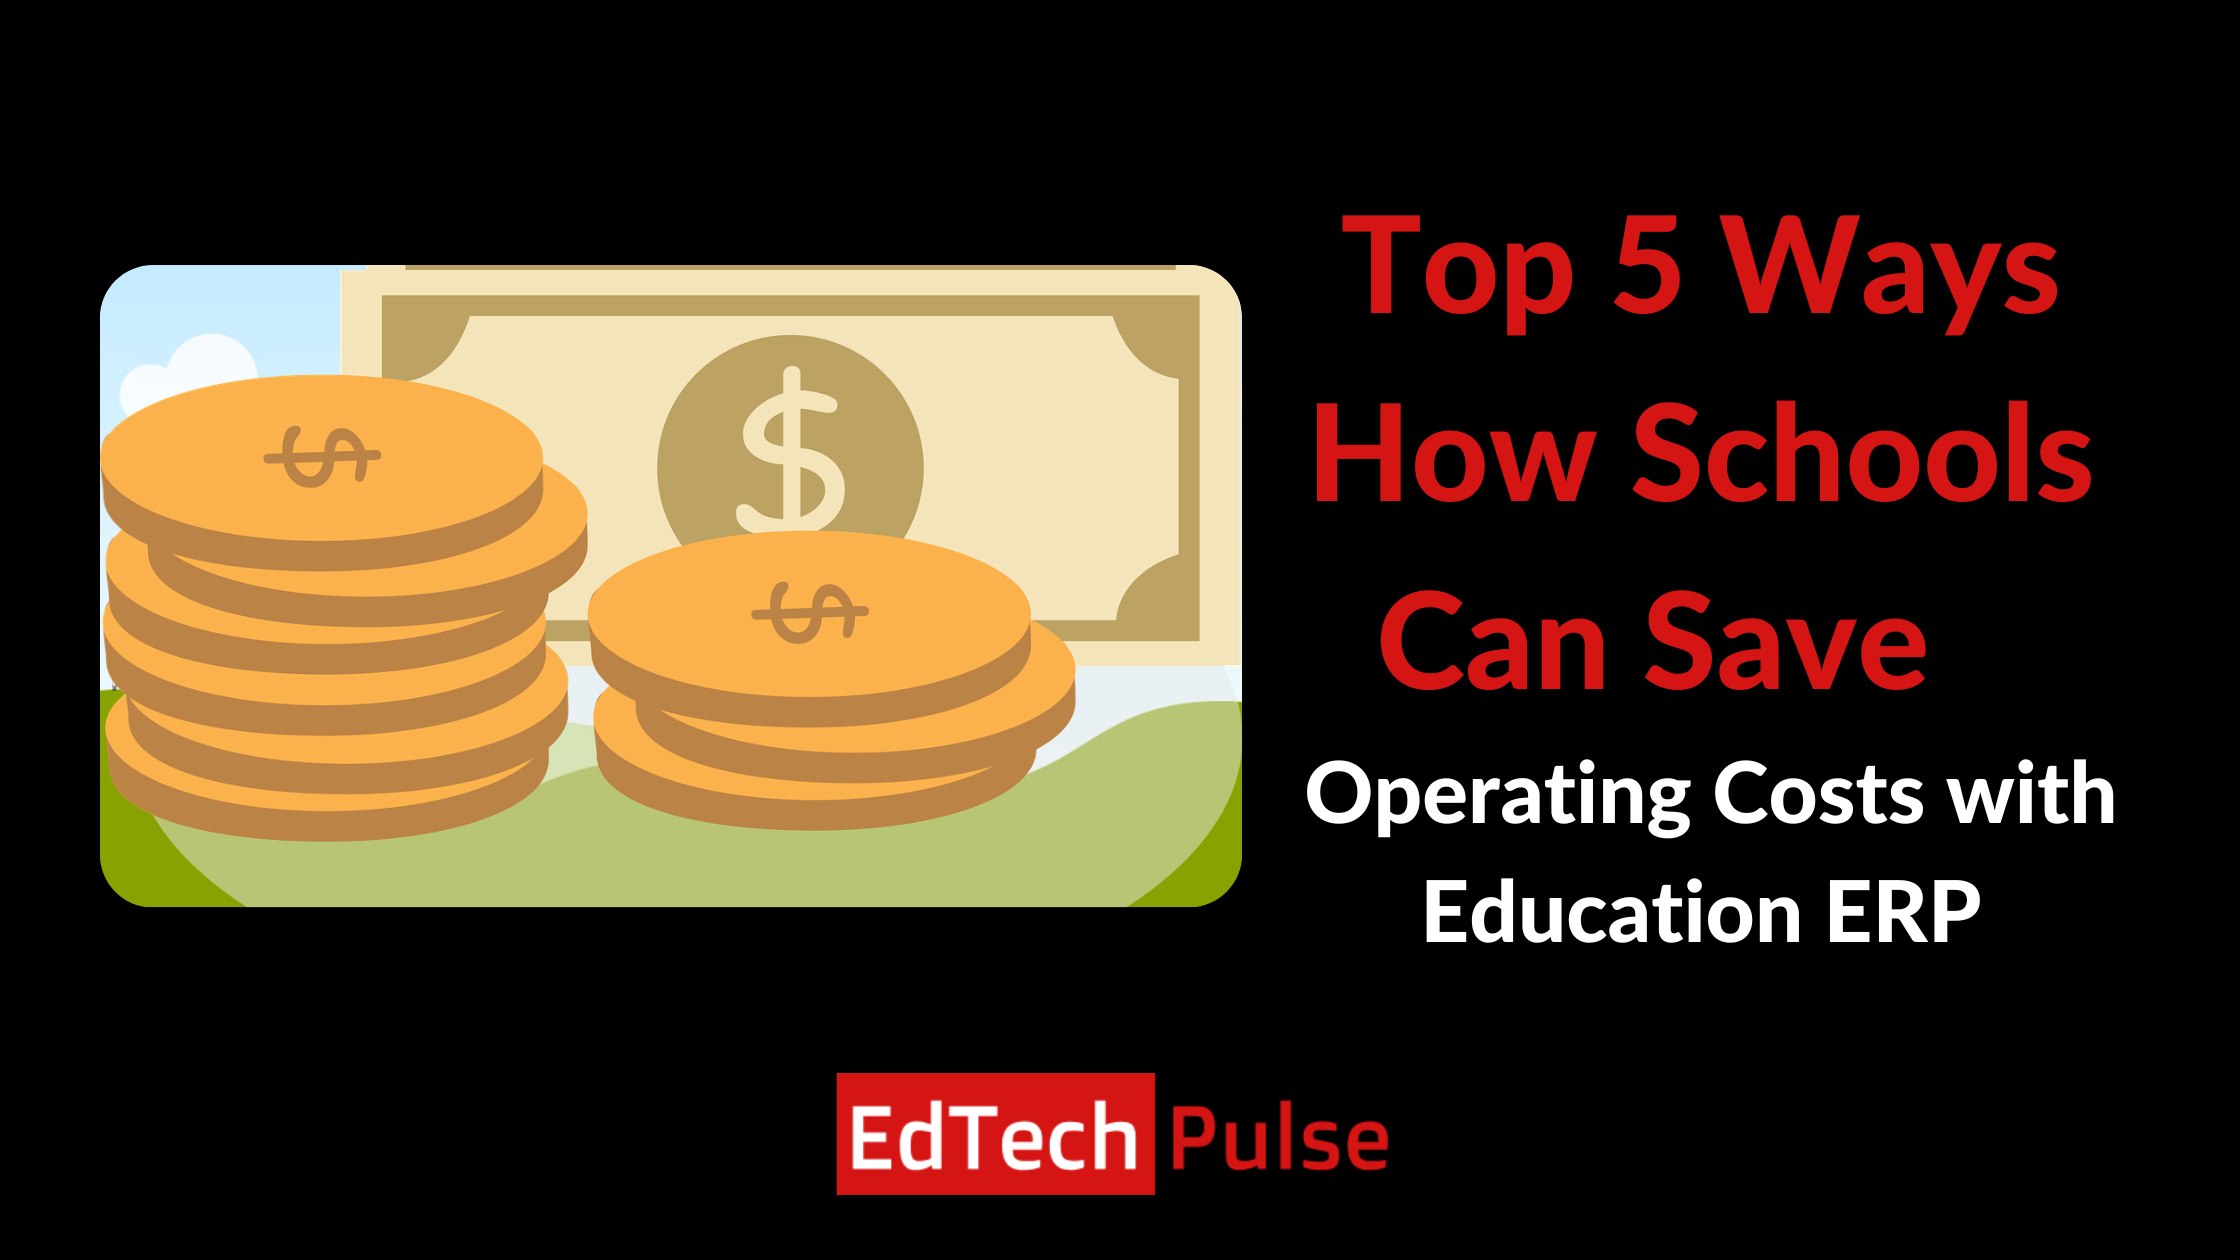 Top 5 Ways How Schools Can Save Operating Costs with Education ERP